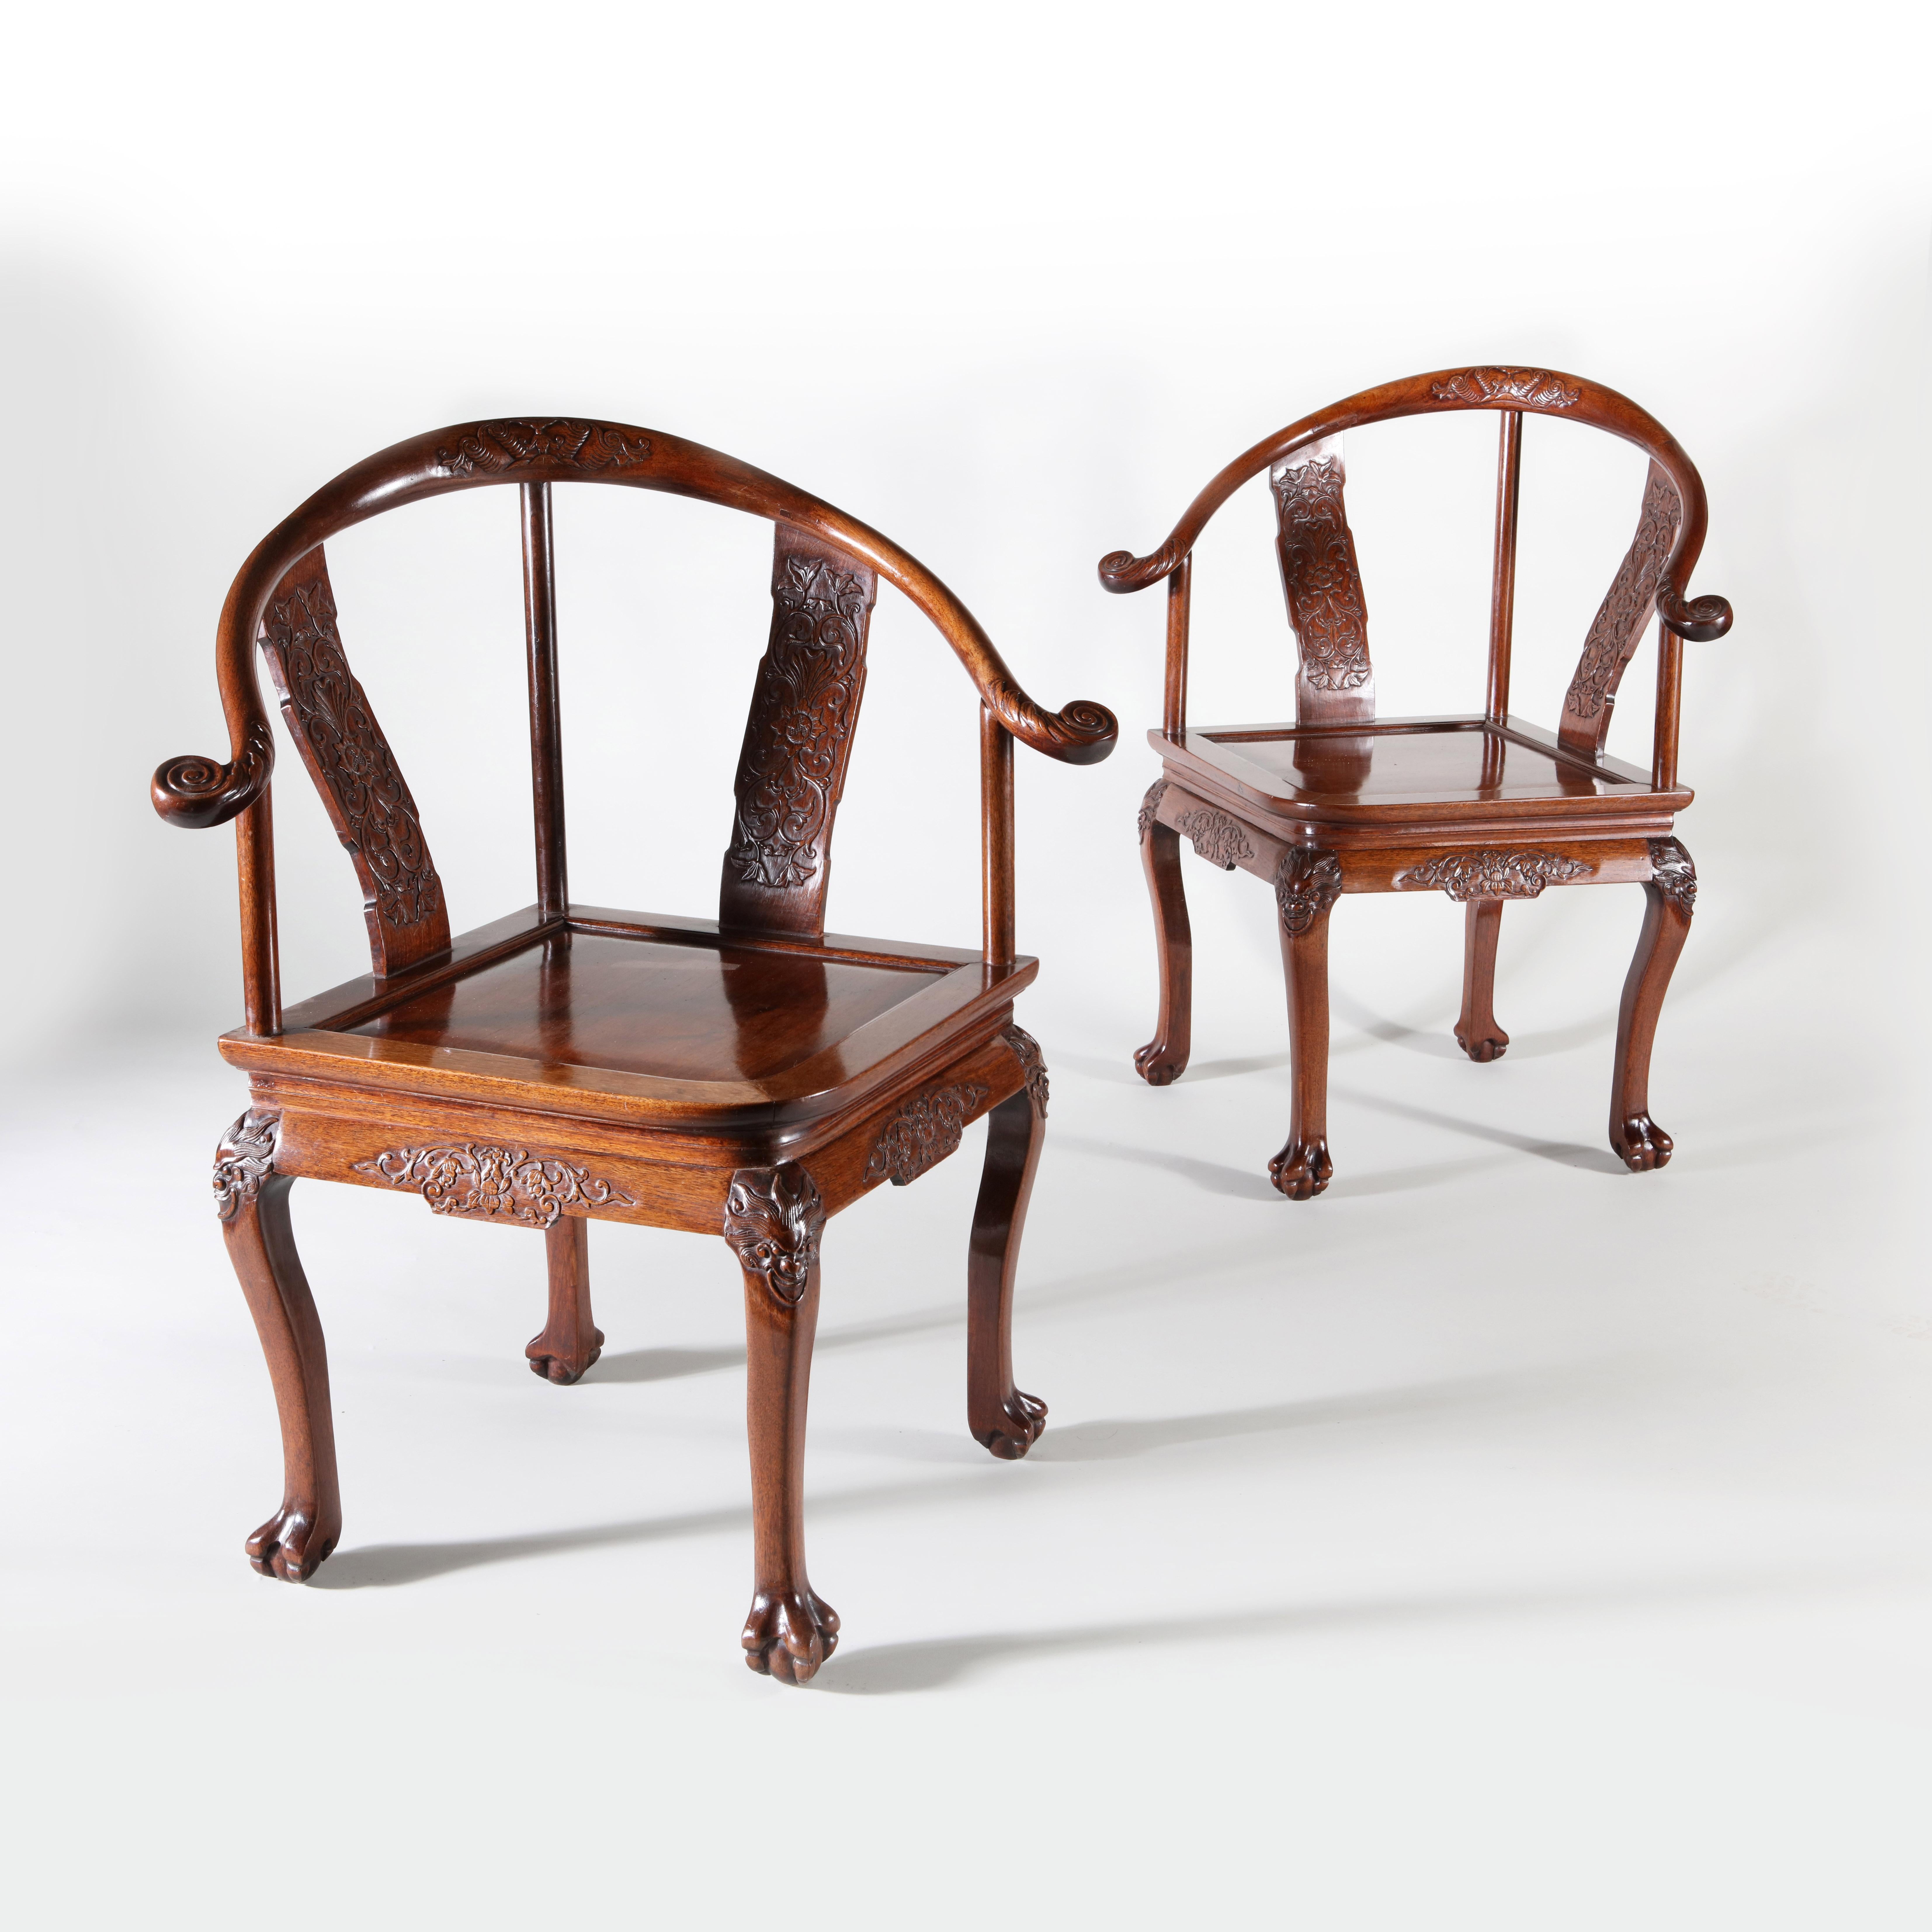 A rare pair of late 18th century Chinese Huang Huali armchairs with yoke backs terminating in scrolls and supported by splats and columns, centered around a traditional paneled seat with cabriole legs carved with dragons at the knee and terminating